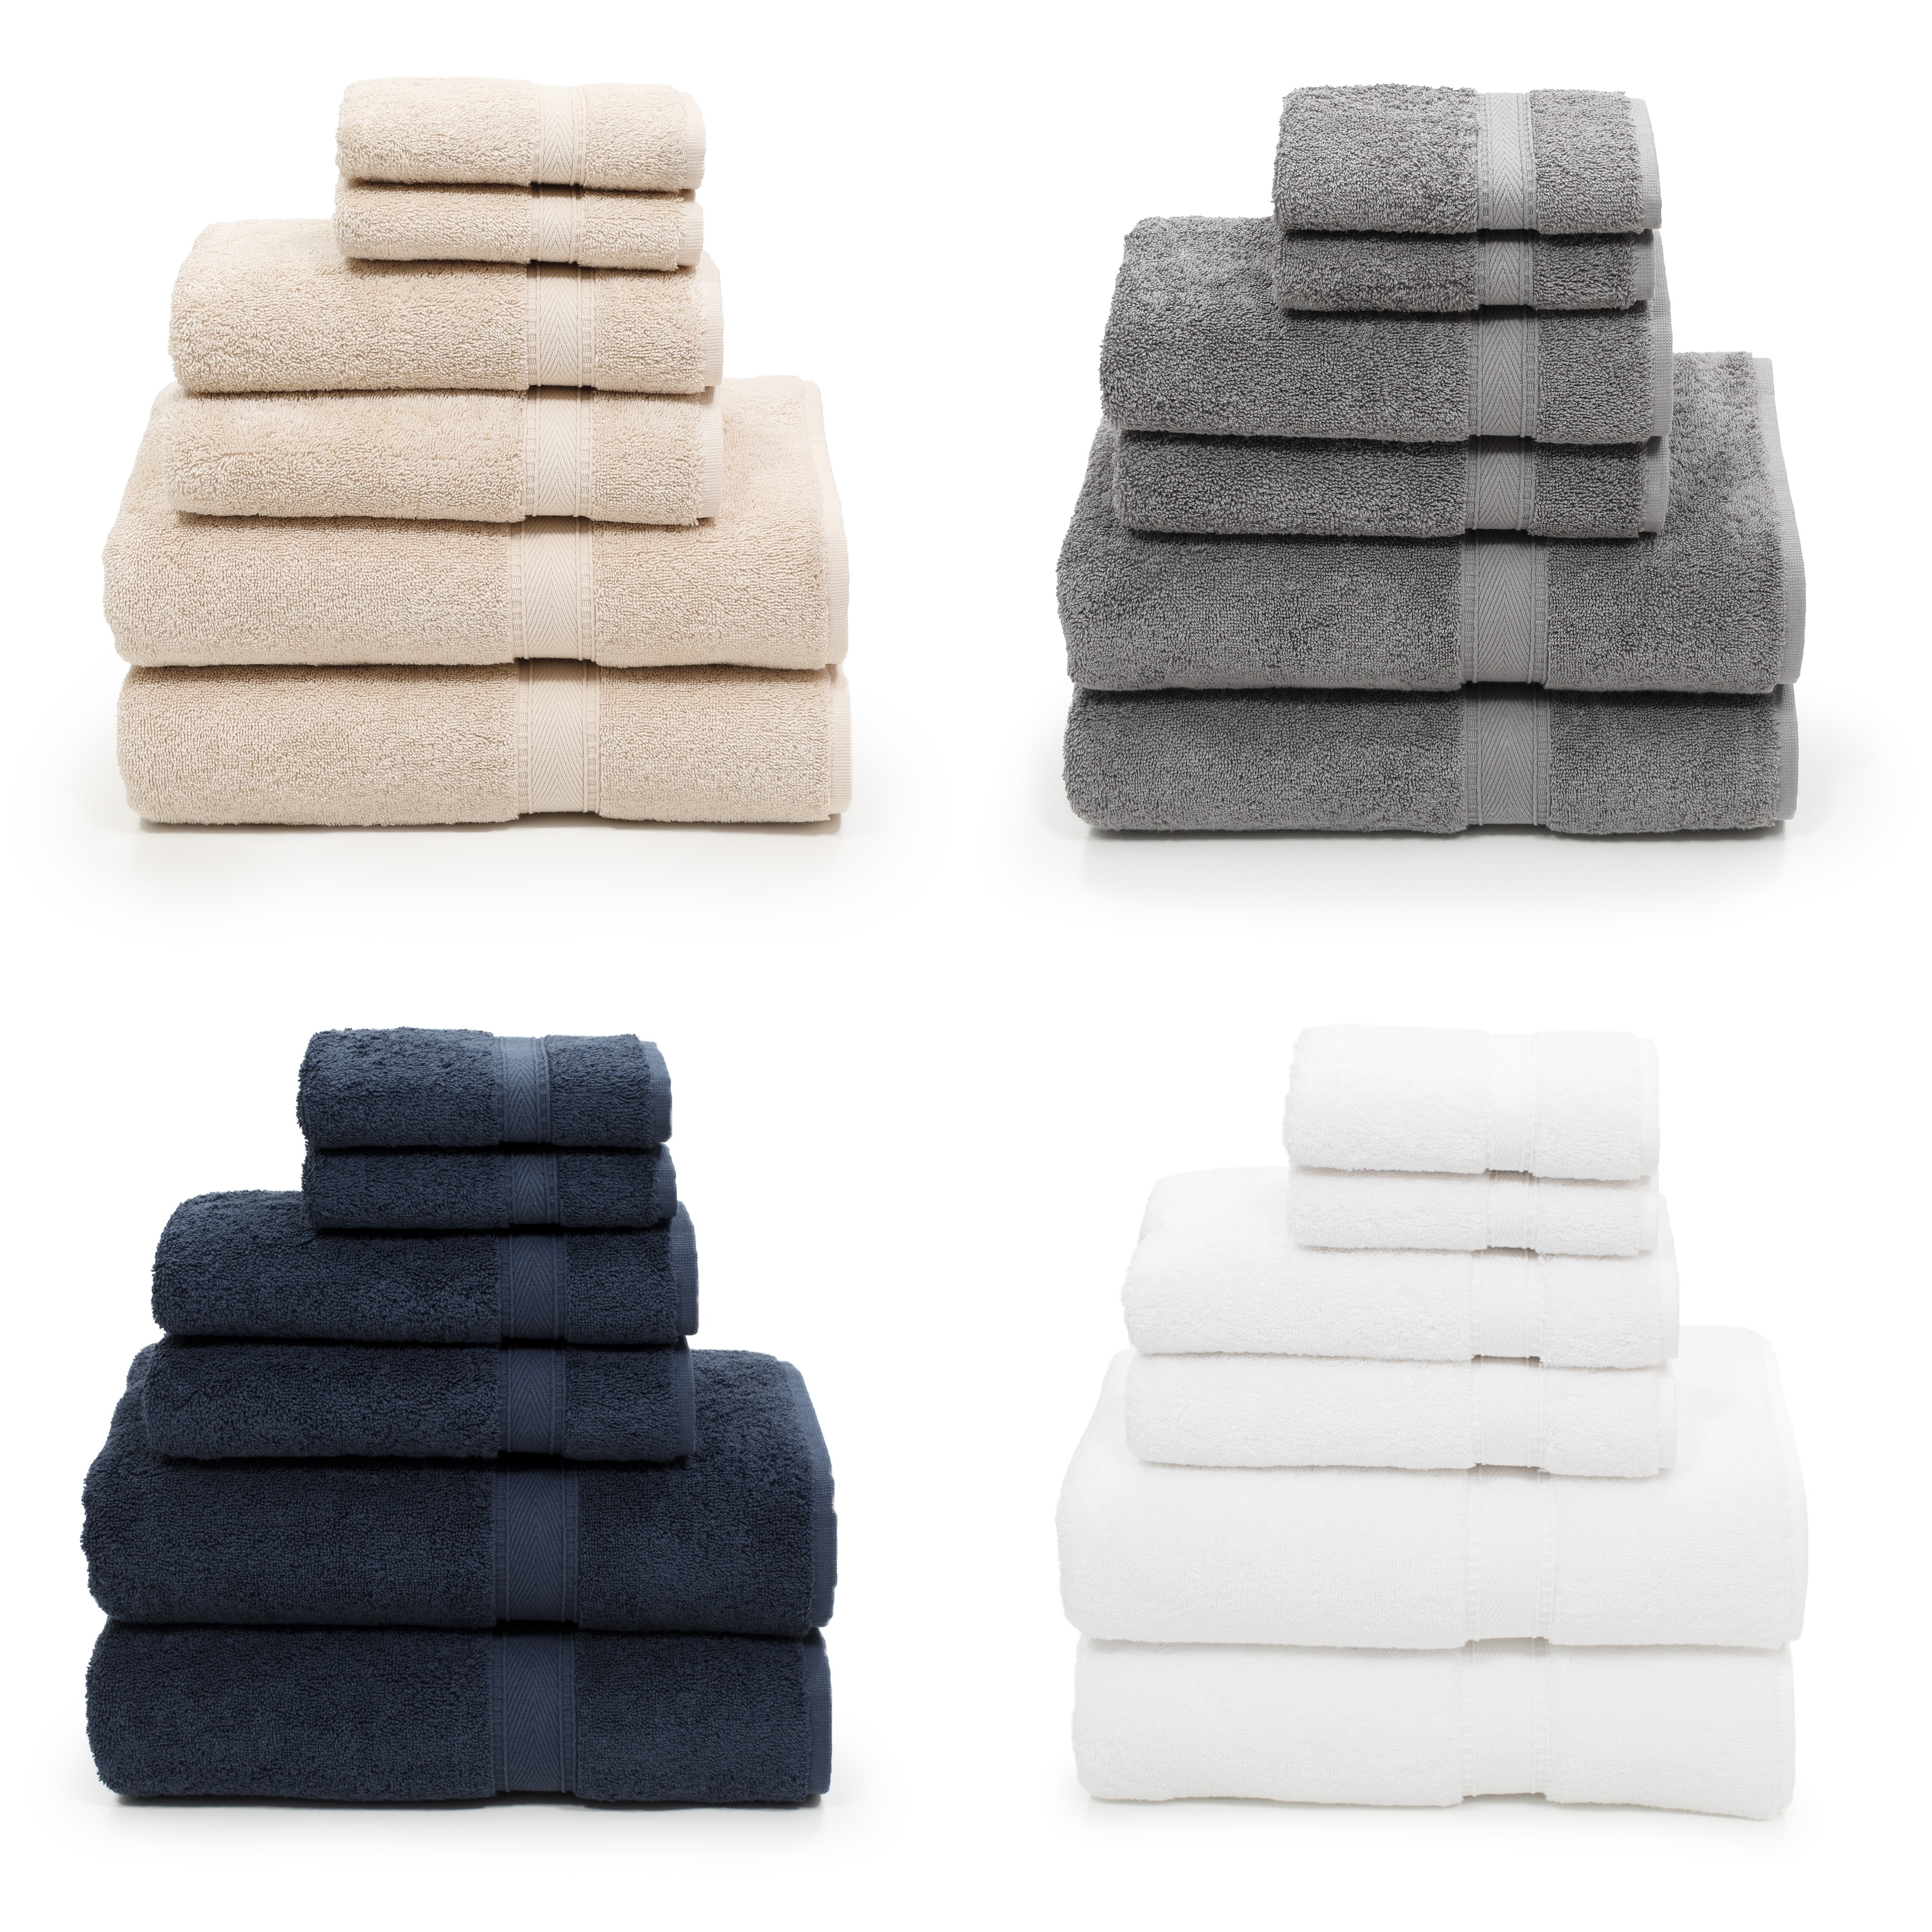 https://ak1.ostkcdn.com/images/products/is/images/direct/605be6badf6f6ee2a3e565f81c04135c91d7570f/Authentic-Hotel-and-Spa-Turkish-Cotton-6-piece-Towel-Set.jpg